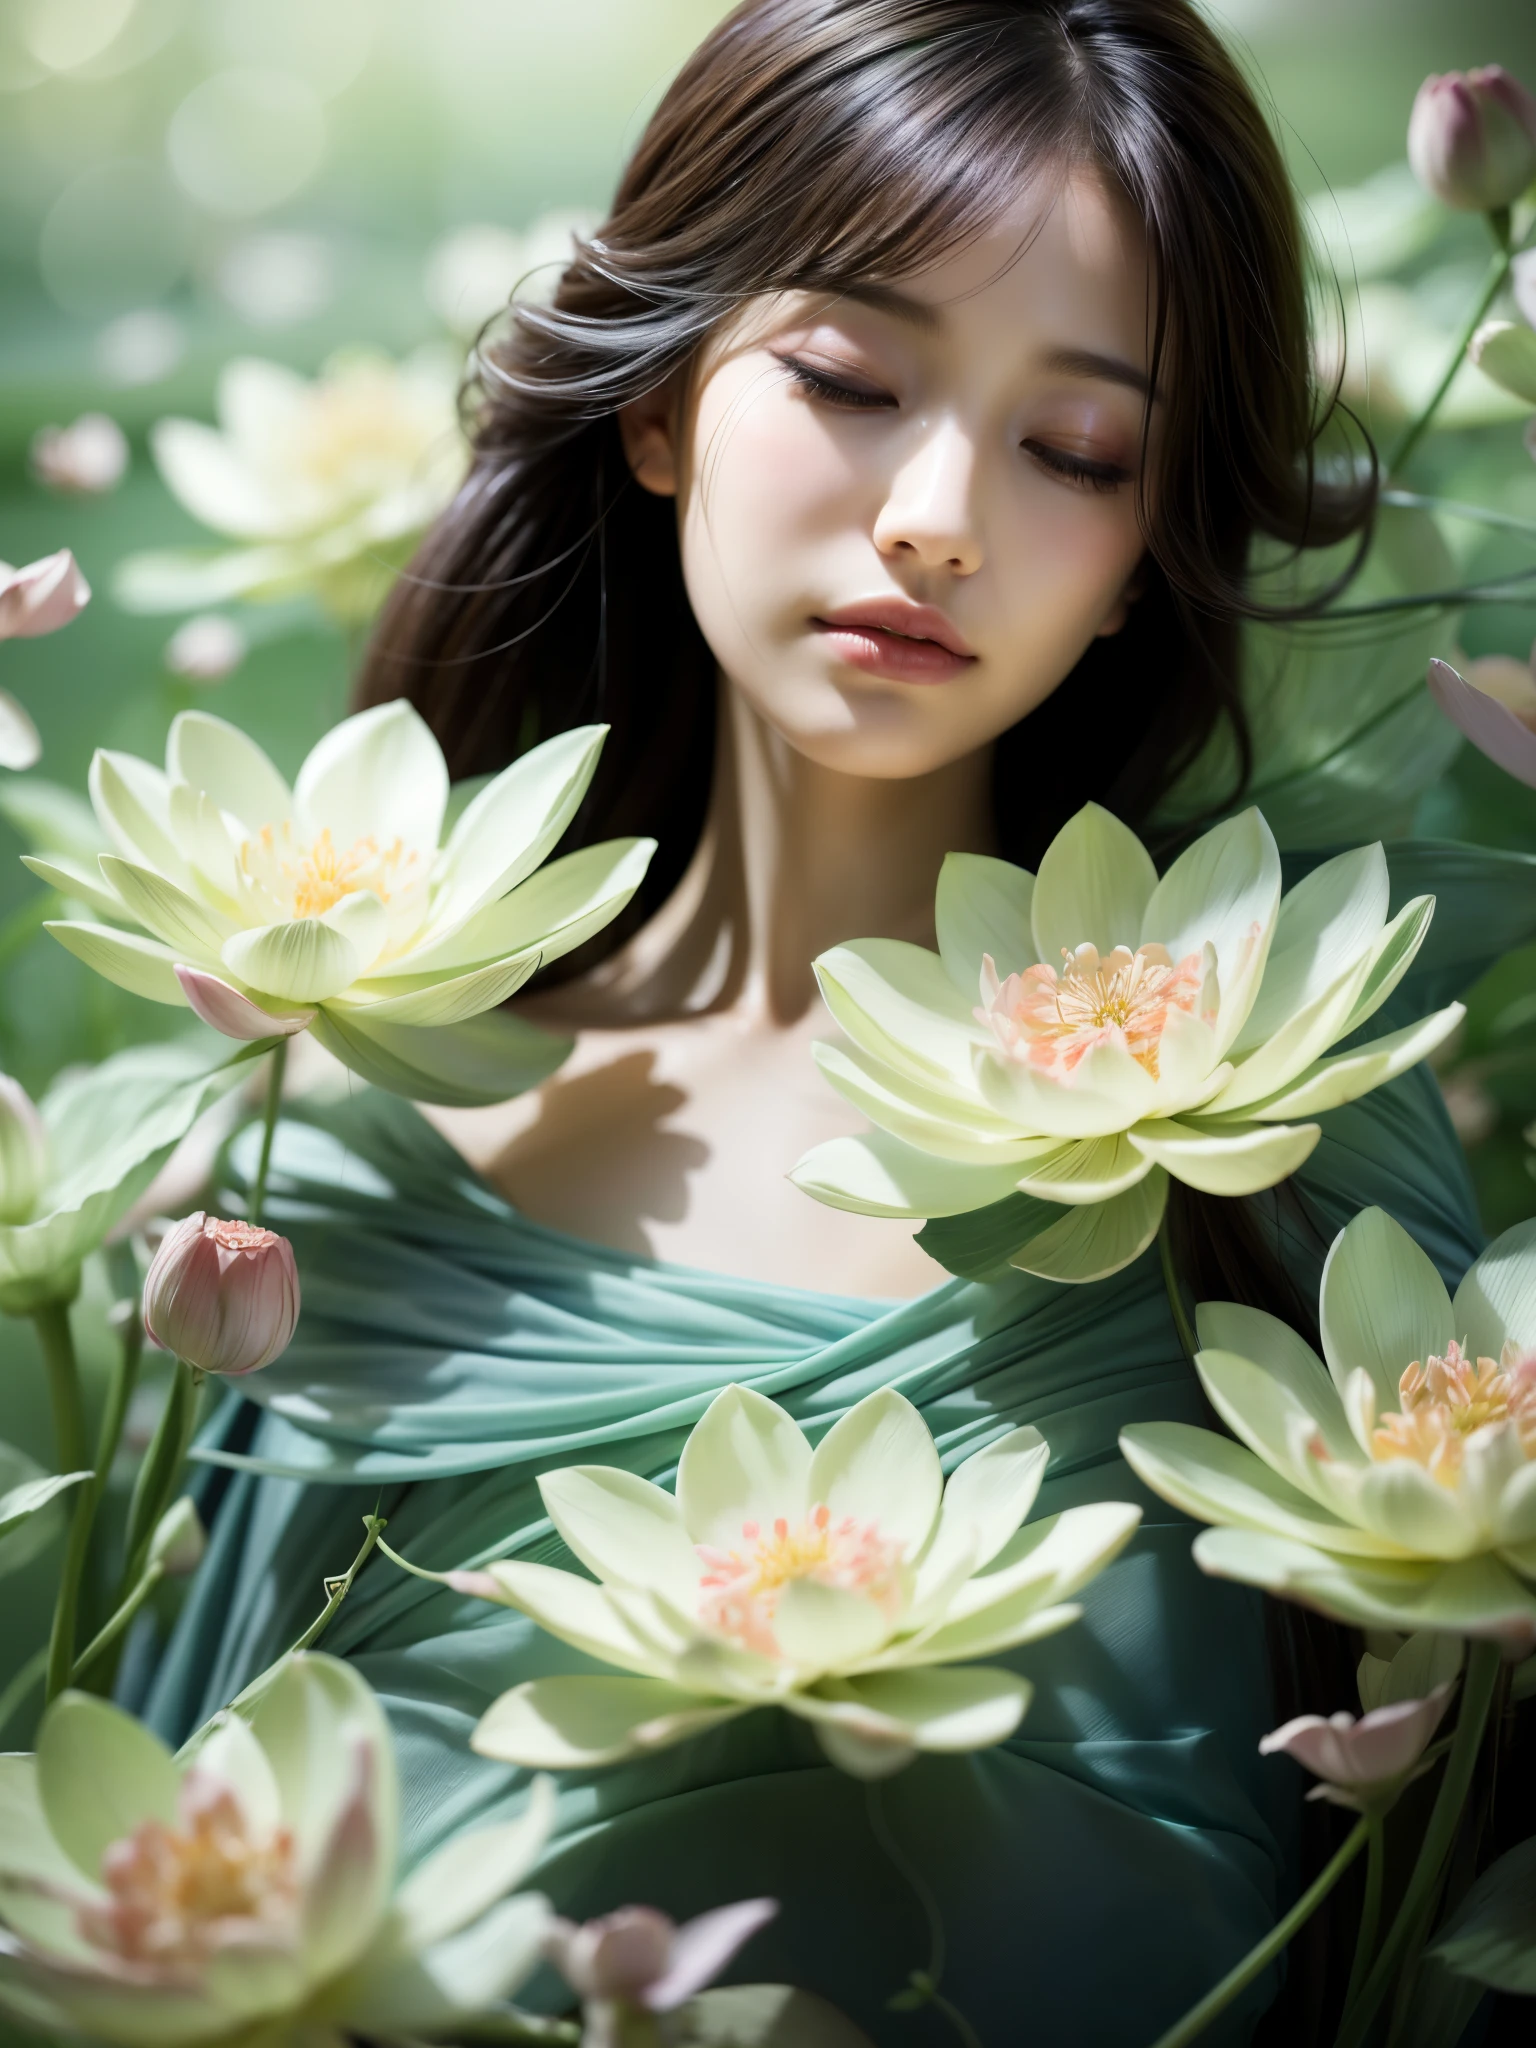 girl lying in a sea of flowers,soft lighting,dreamy atmosphere,beautiful detailed eyes,long eyelashes,soft smile,vivid colors,romantic and ethereal,impressionistic style,colorful petals,serene and peaceful ambiance,medium oil painting,ultra-detailed floral textures,realistic rendering,delicate brushstrokes,highres masterpiece,subtle bokeh effect,slightly blurred background,gentle breeze rustling the petals,serene and tranquil setting